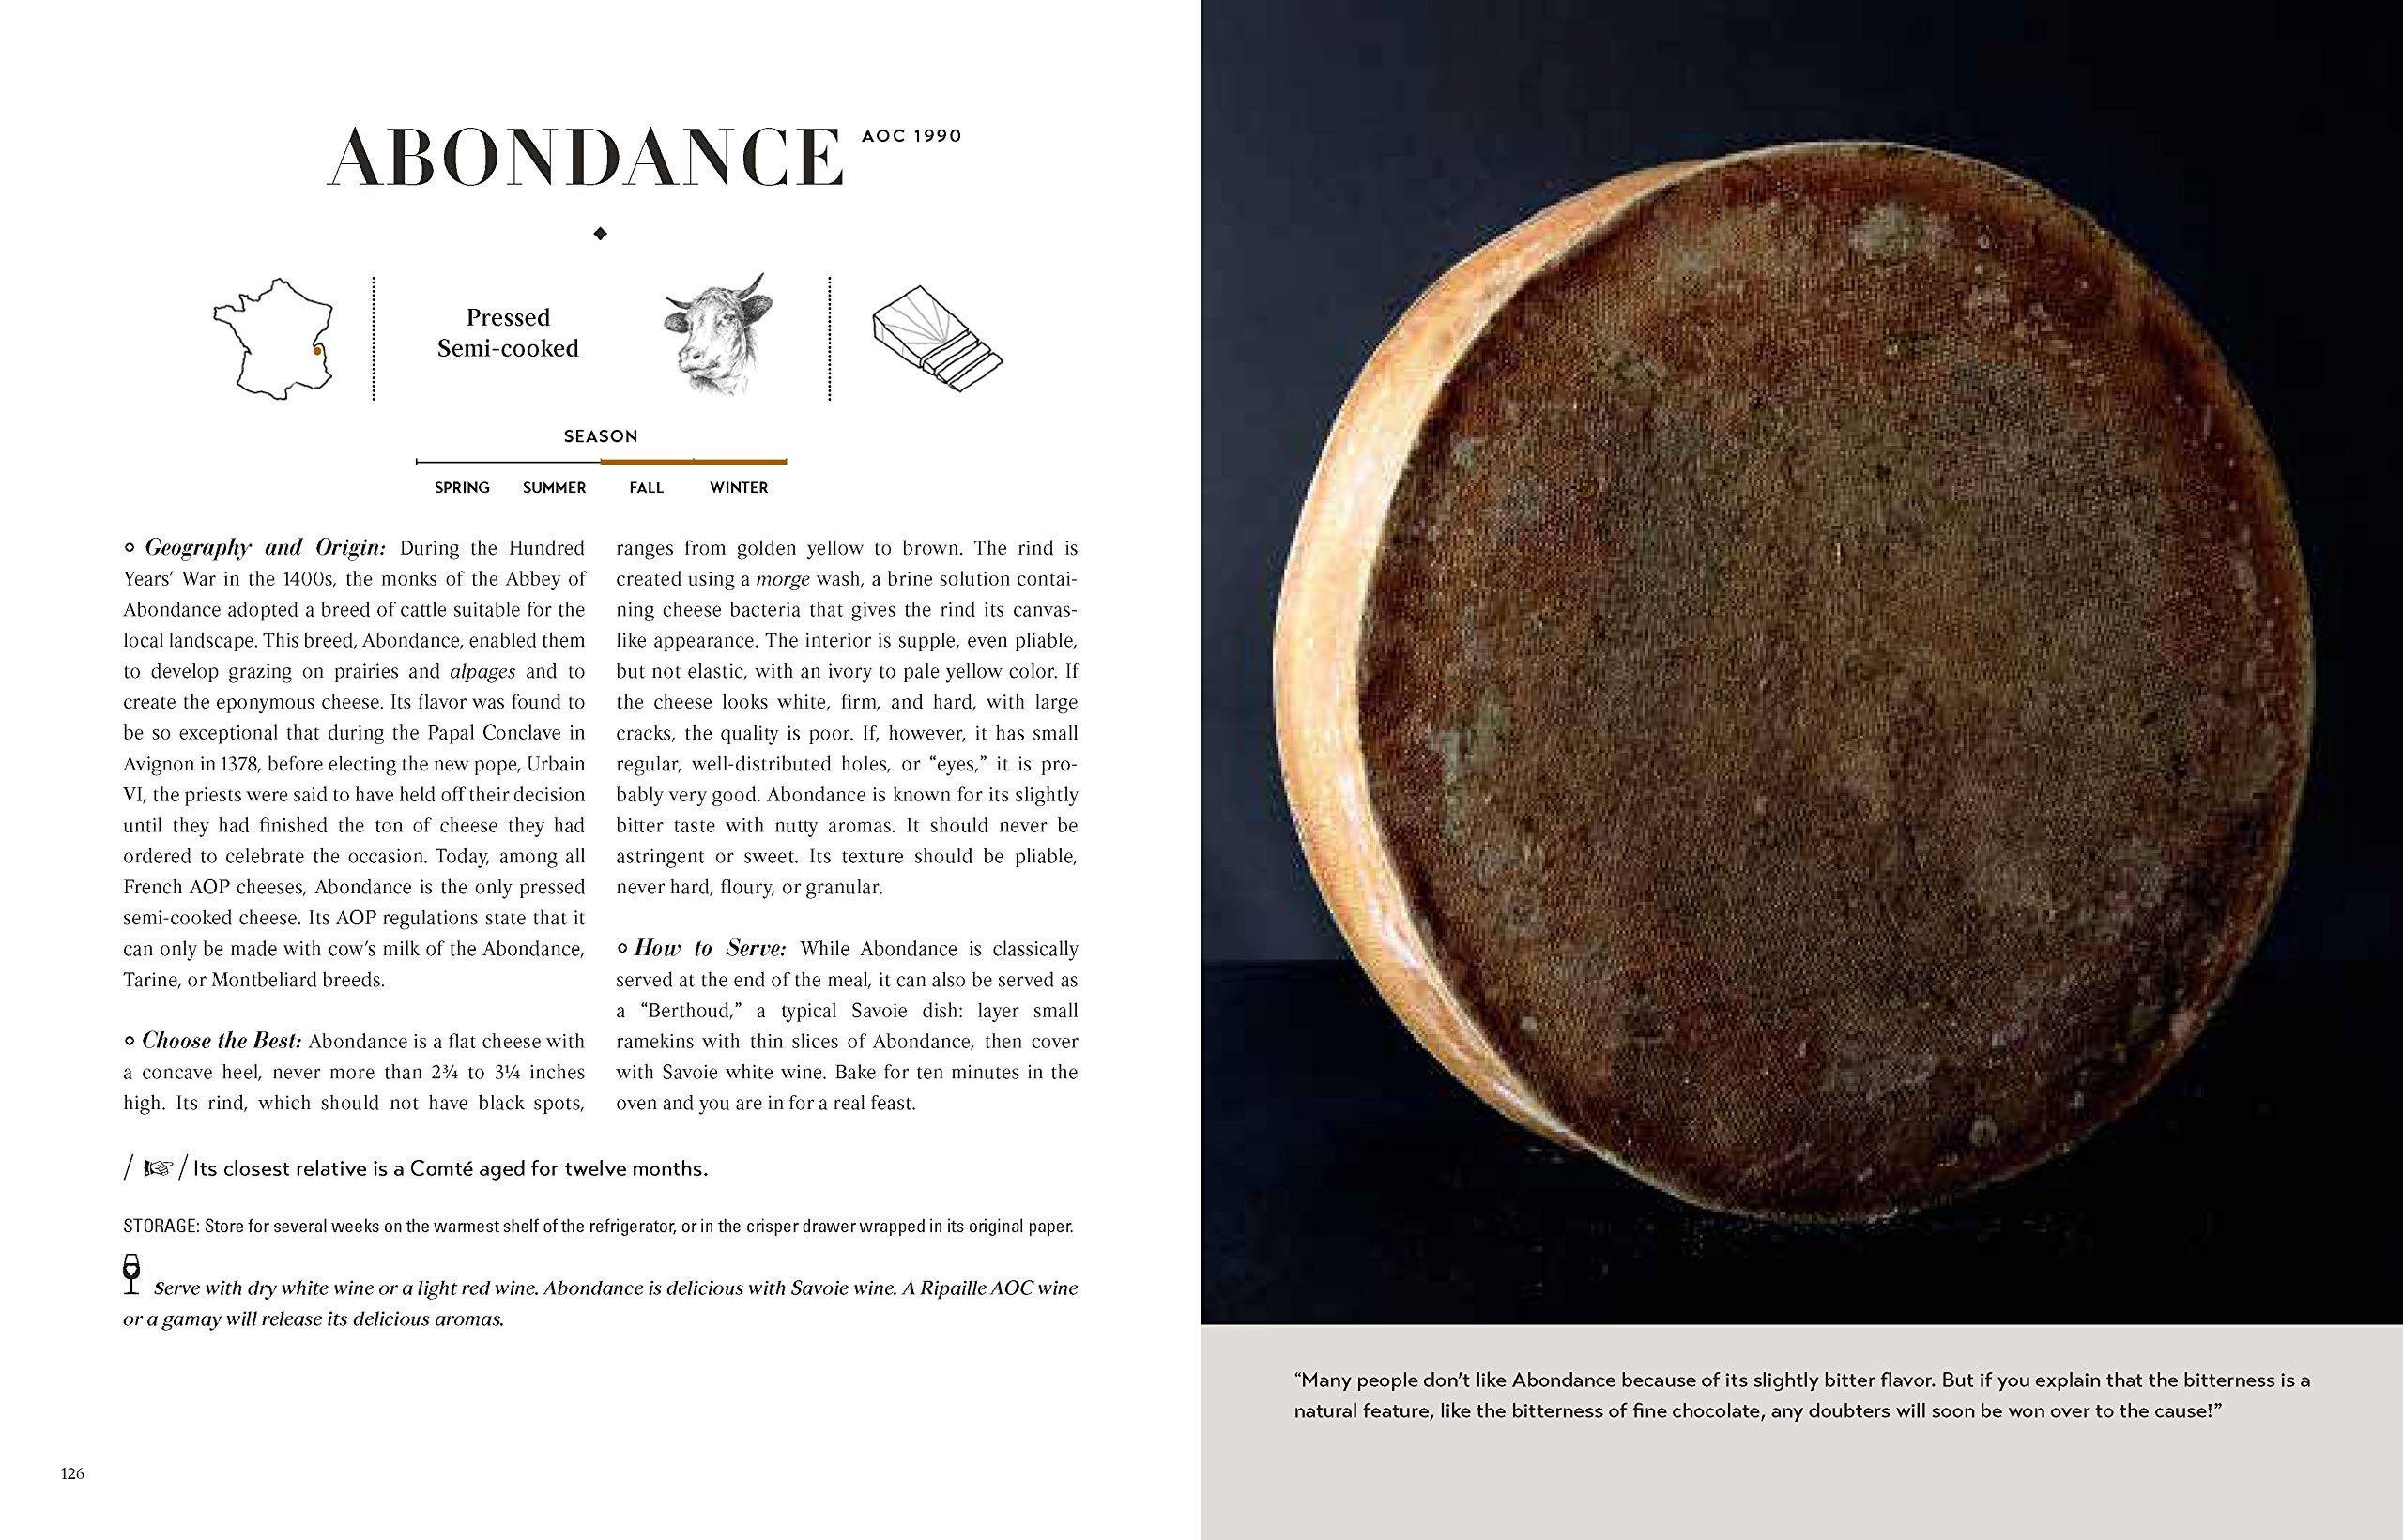 Fromages: An Expert's Guide to French Cheese (Dominique Bouchait)